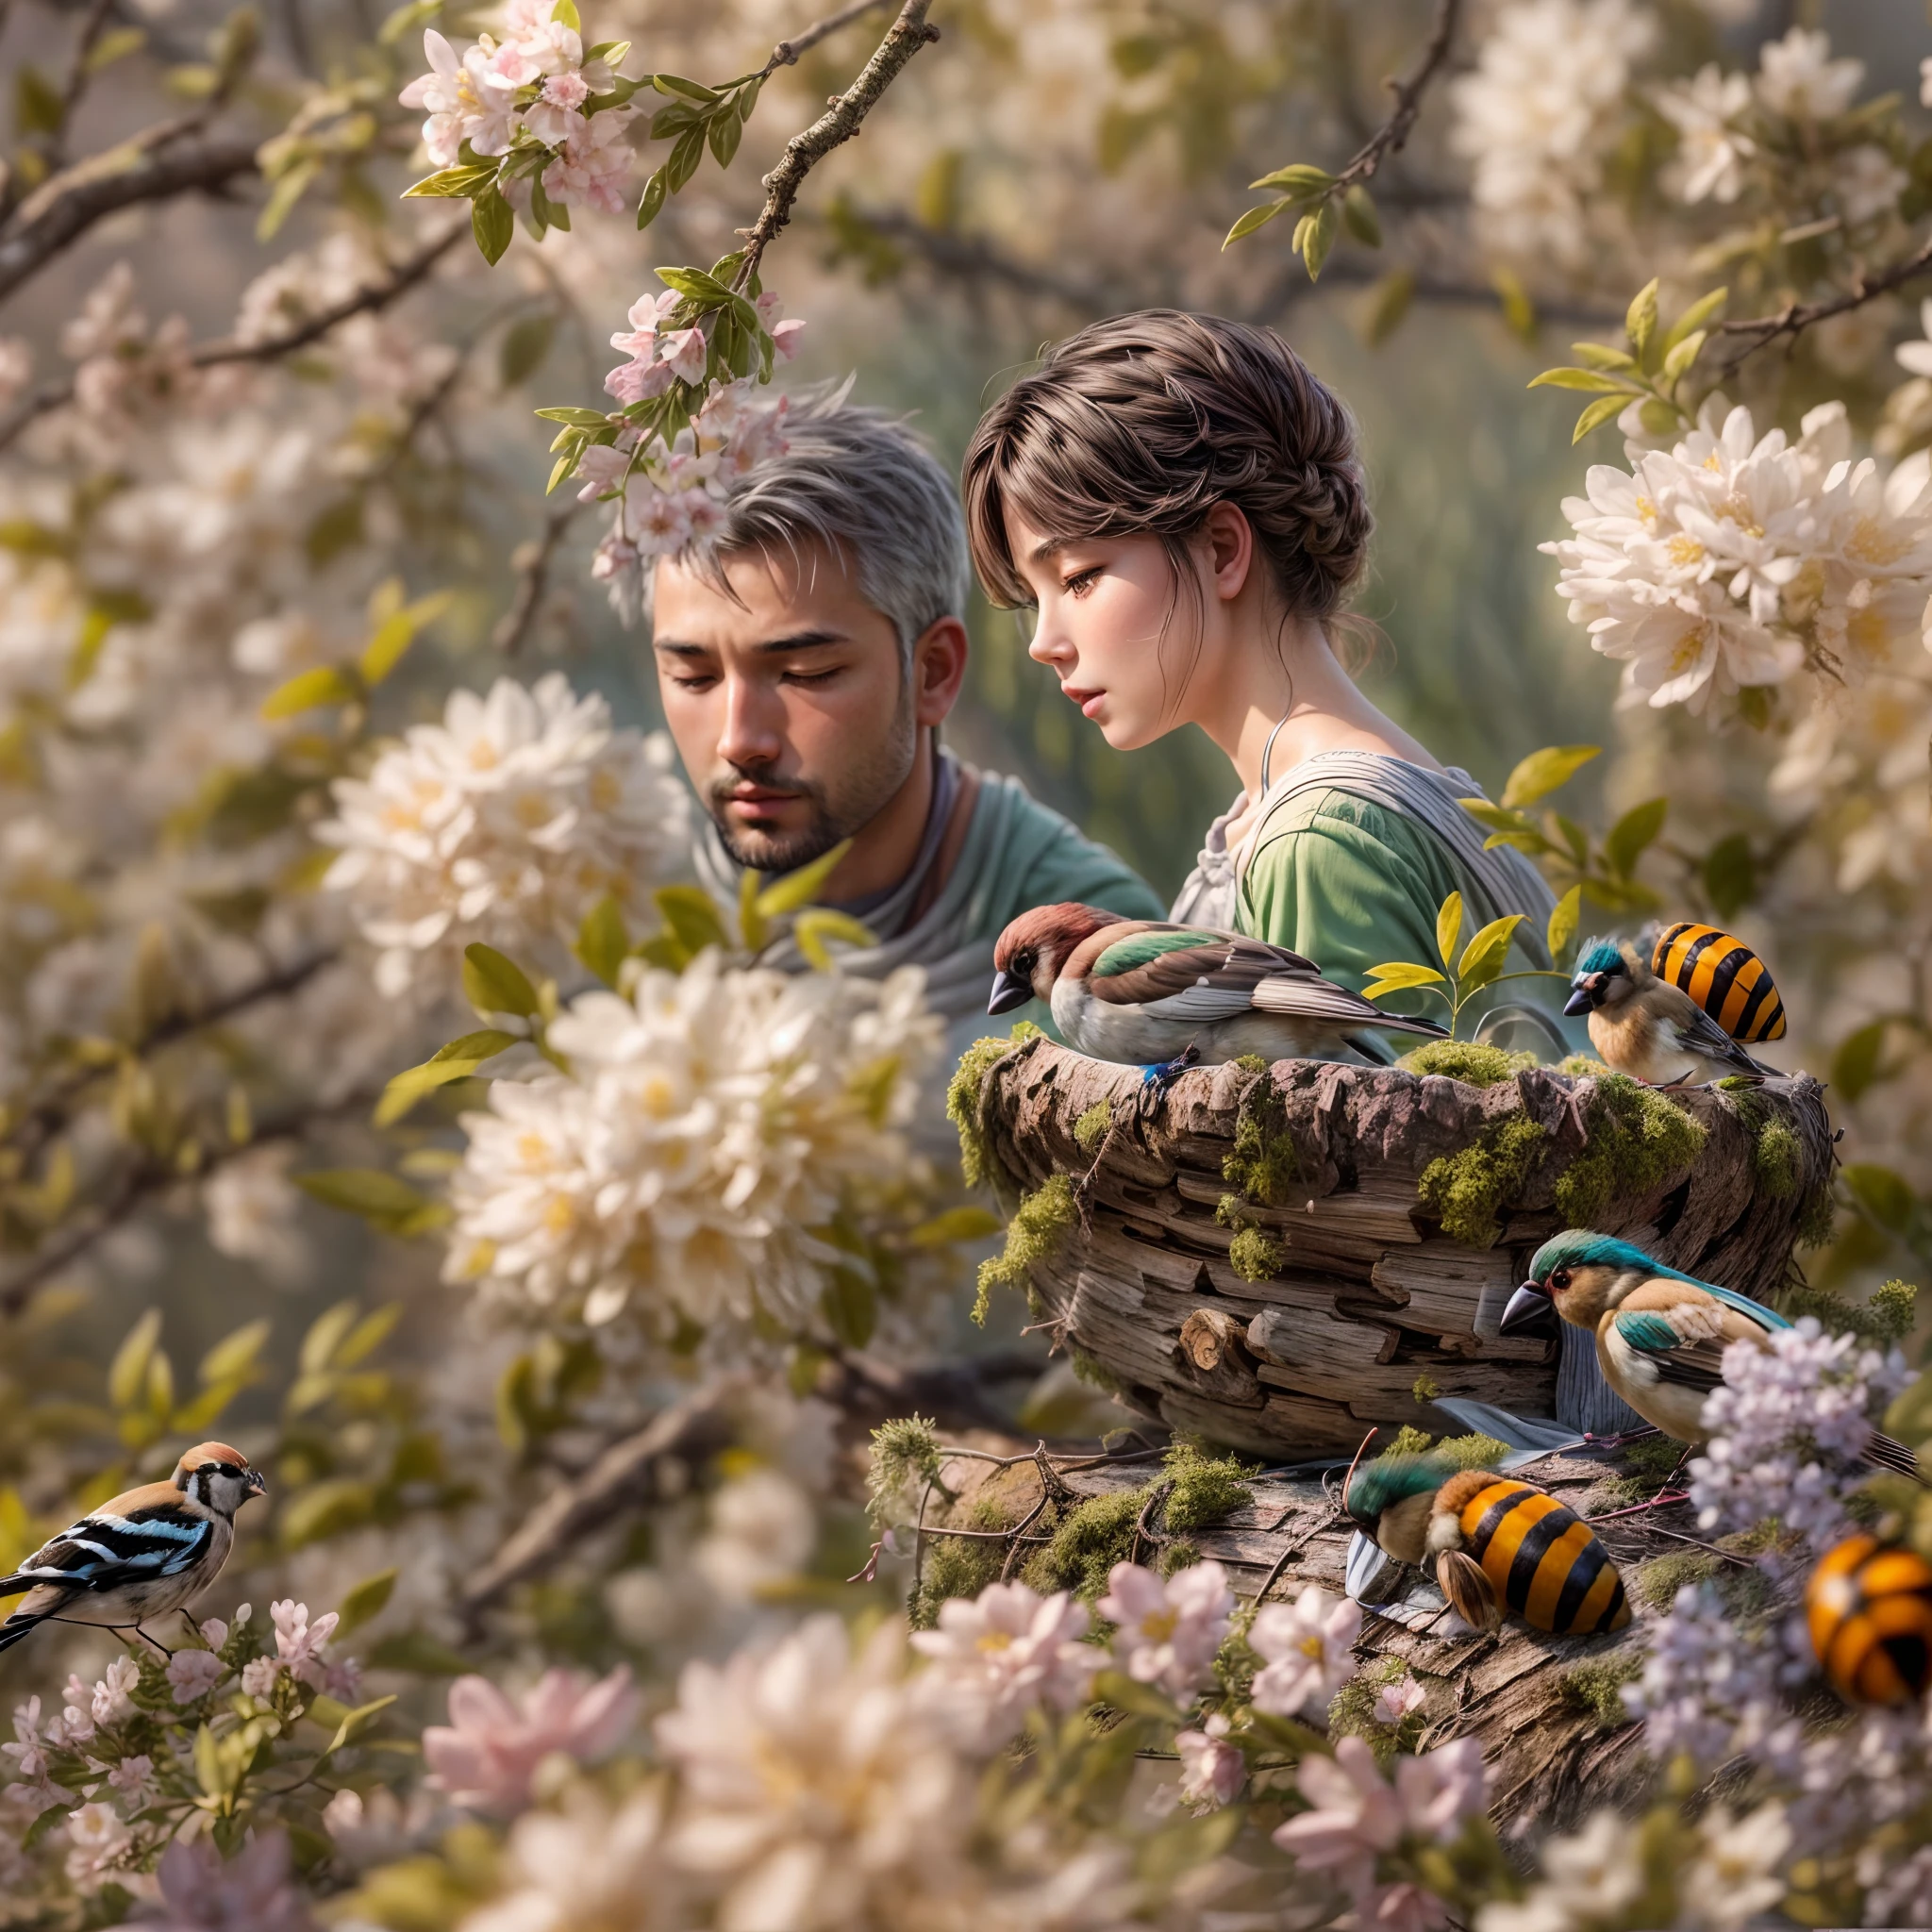 Hyperdetailed Oil painting, ultrawide view, late spring, a (wholesome romantic human couple rest in a meadow of whitethorn bush), (lady bug on flower), vivacious (bee pollinating pink flowers), (chaffinch watching scene from grey mossy nest), masterpiece, masterwork, meticulous, intimate, nuanced, highest quality, highest fidelity, highest resolution, highres, highest detail, hyper-detailed, detail enhancement, deeply detailed, uhd, hdr, fhd, 8k, 16k, 32k, k, caustics, subsurface scattering, High Dynamic Range, Dynamic Tone Mapping, Specular reflection, sub-pixel convolution,